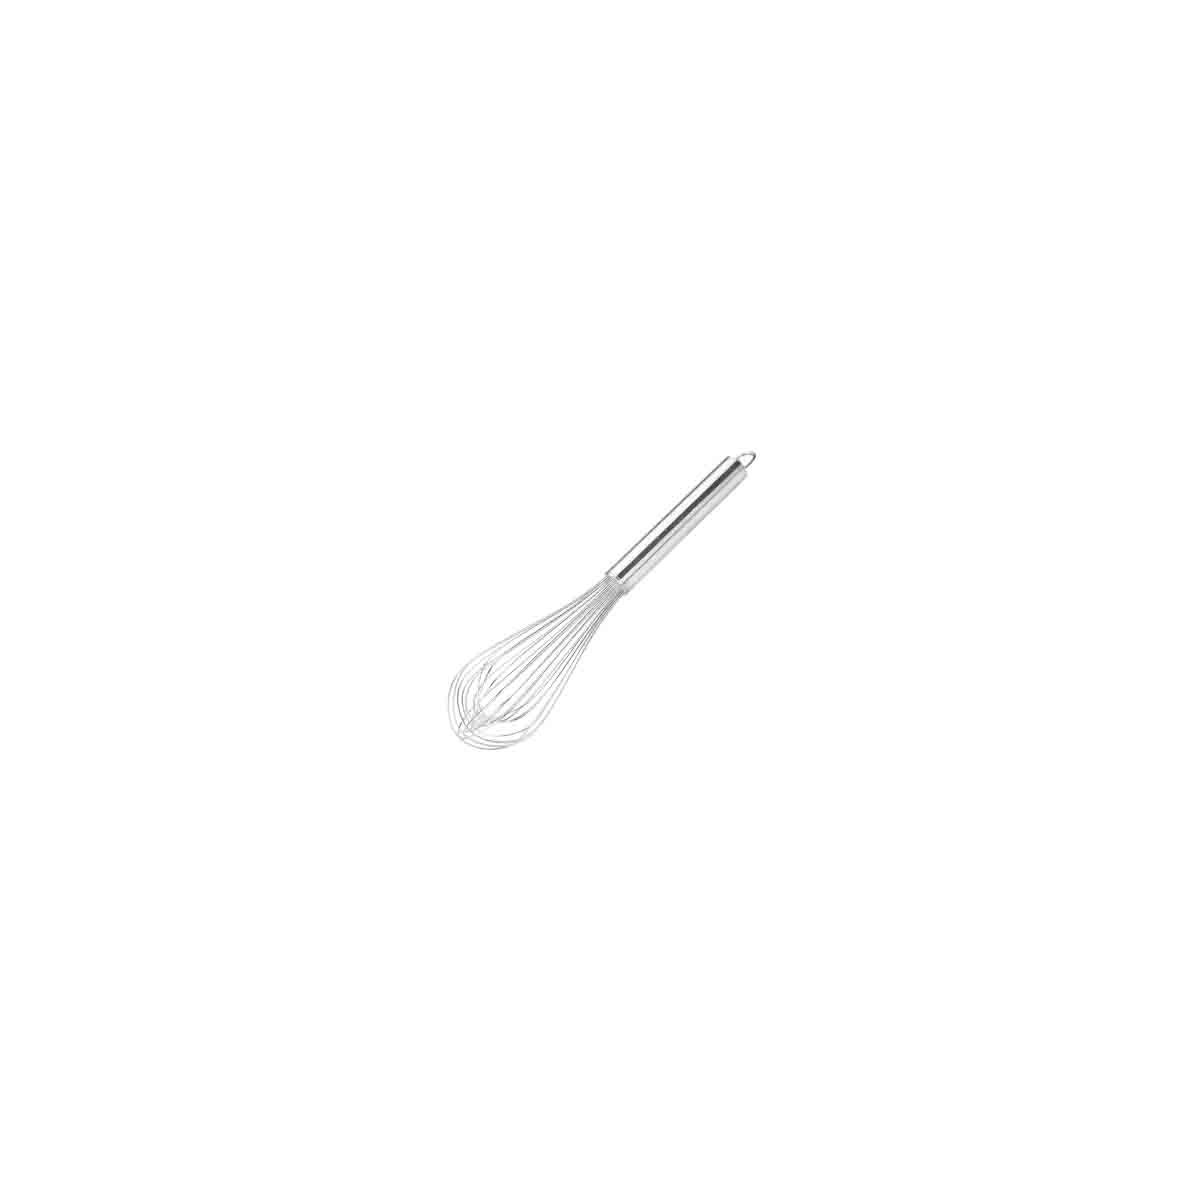 THERMO-HAUSER FOUET TOUT INOX 30CM - 8 FILS 2.0MM